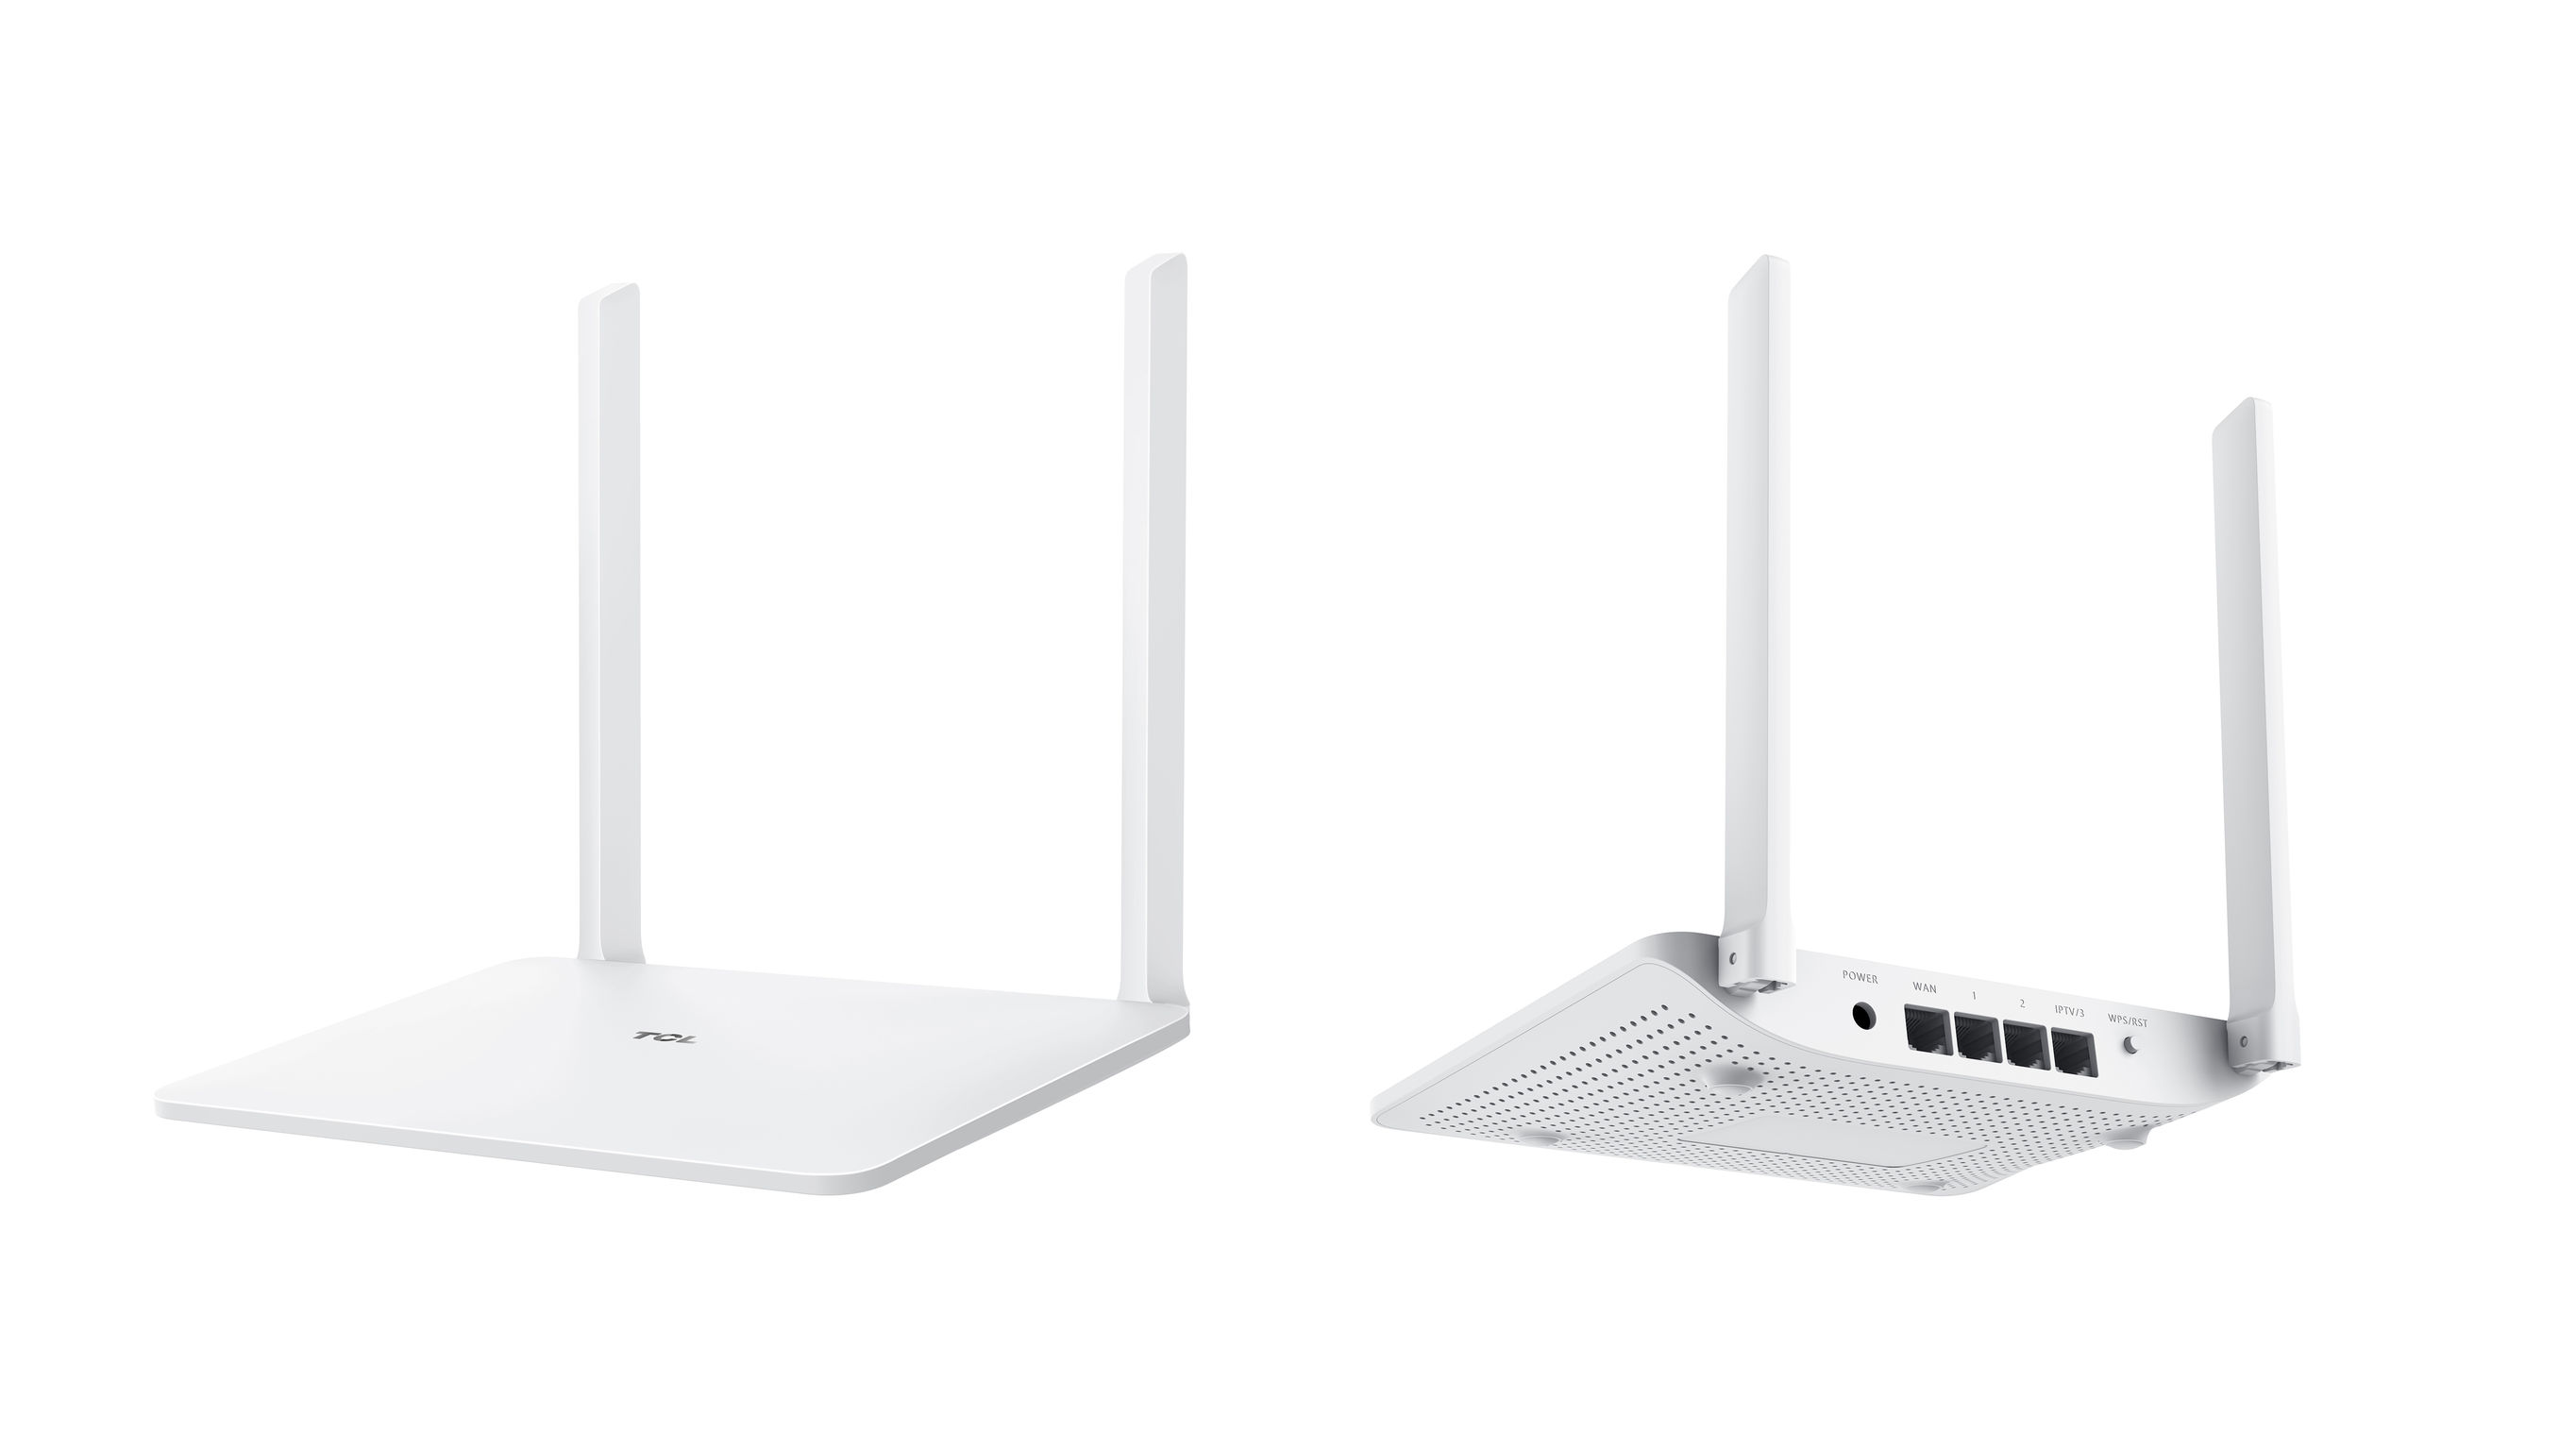 TCL Wi-Fi Router